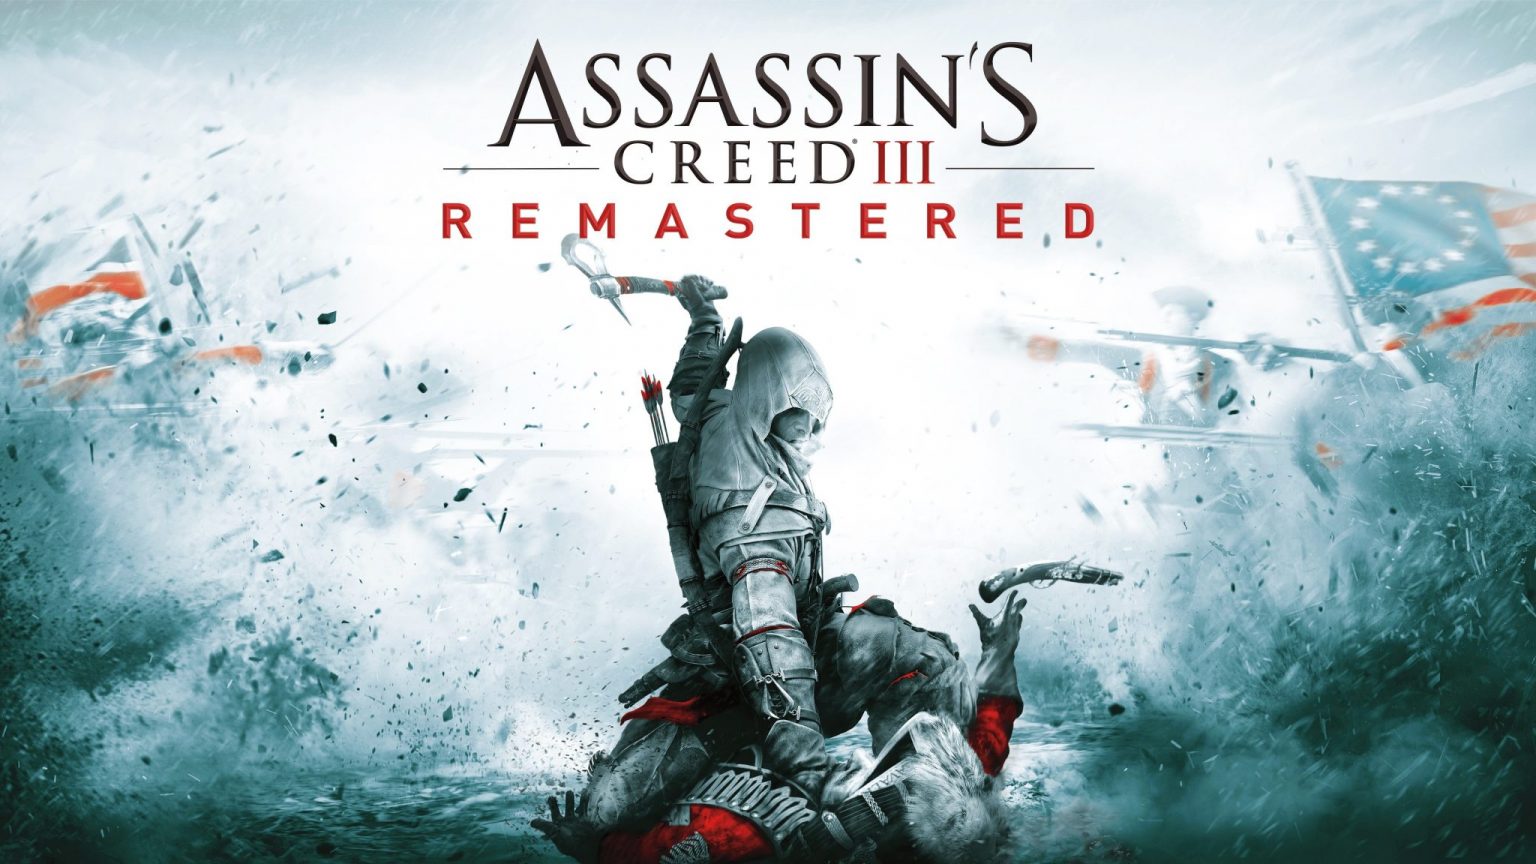 ASSASSINS CREED 3 Full Version Free Download